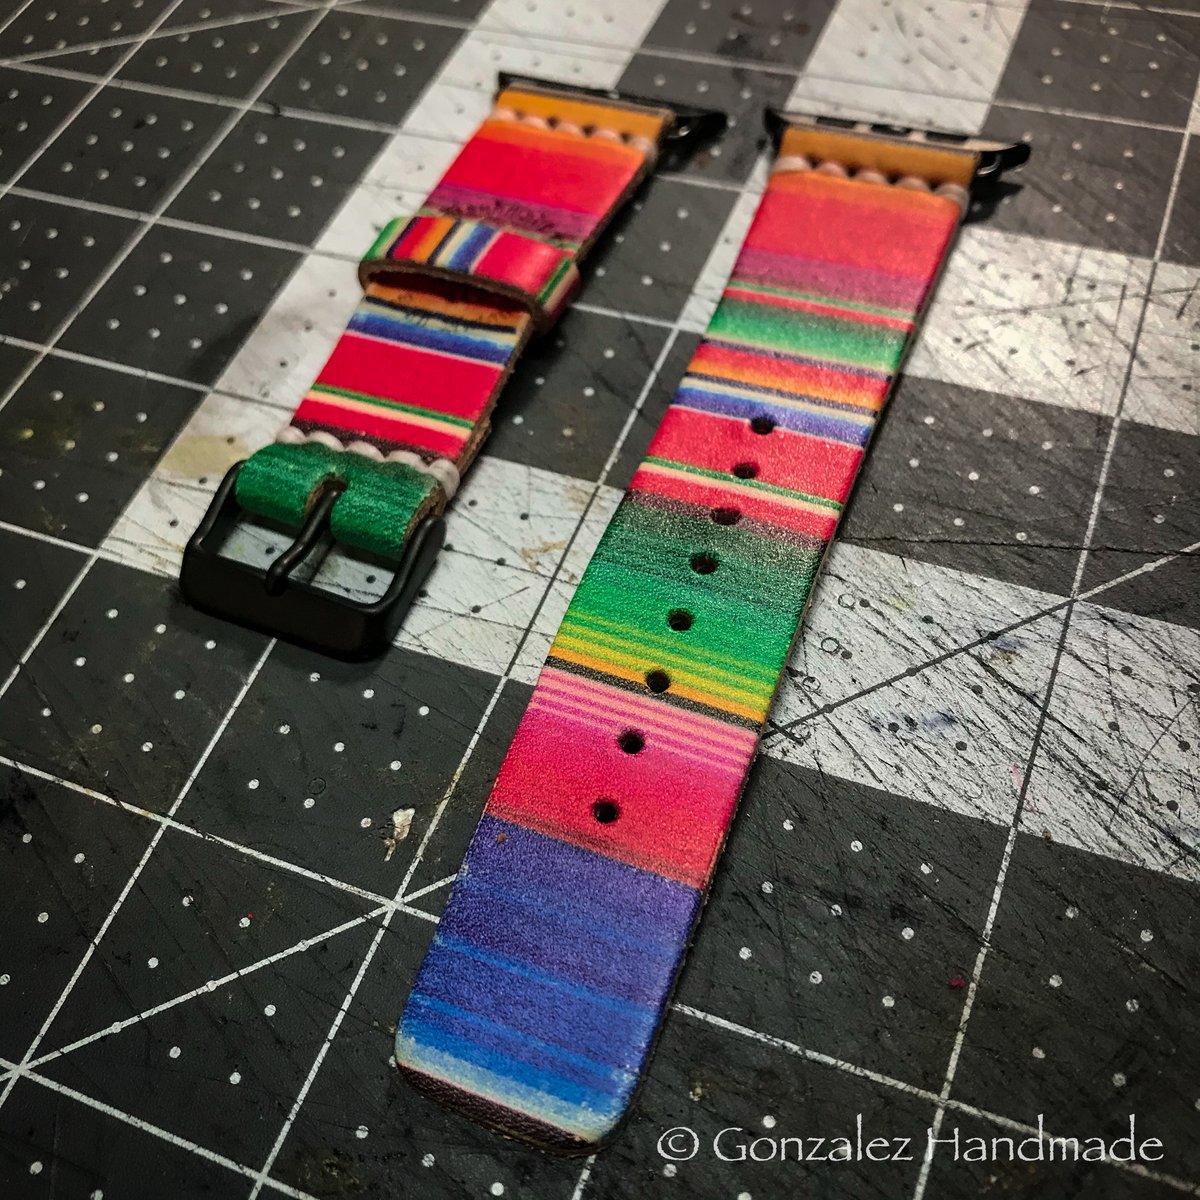 Image of 38/40 or 42/44 Serape Apple Watch Bands